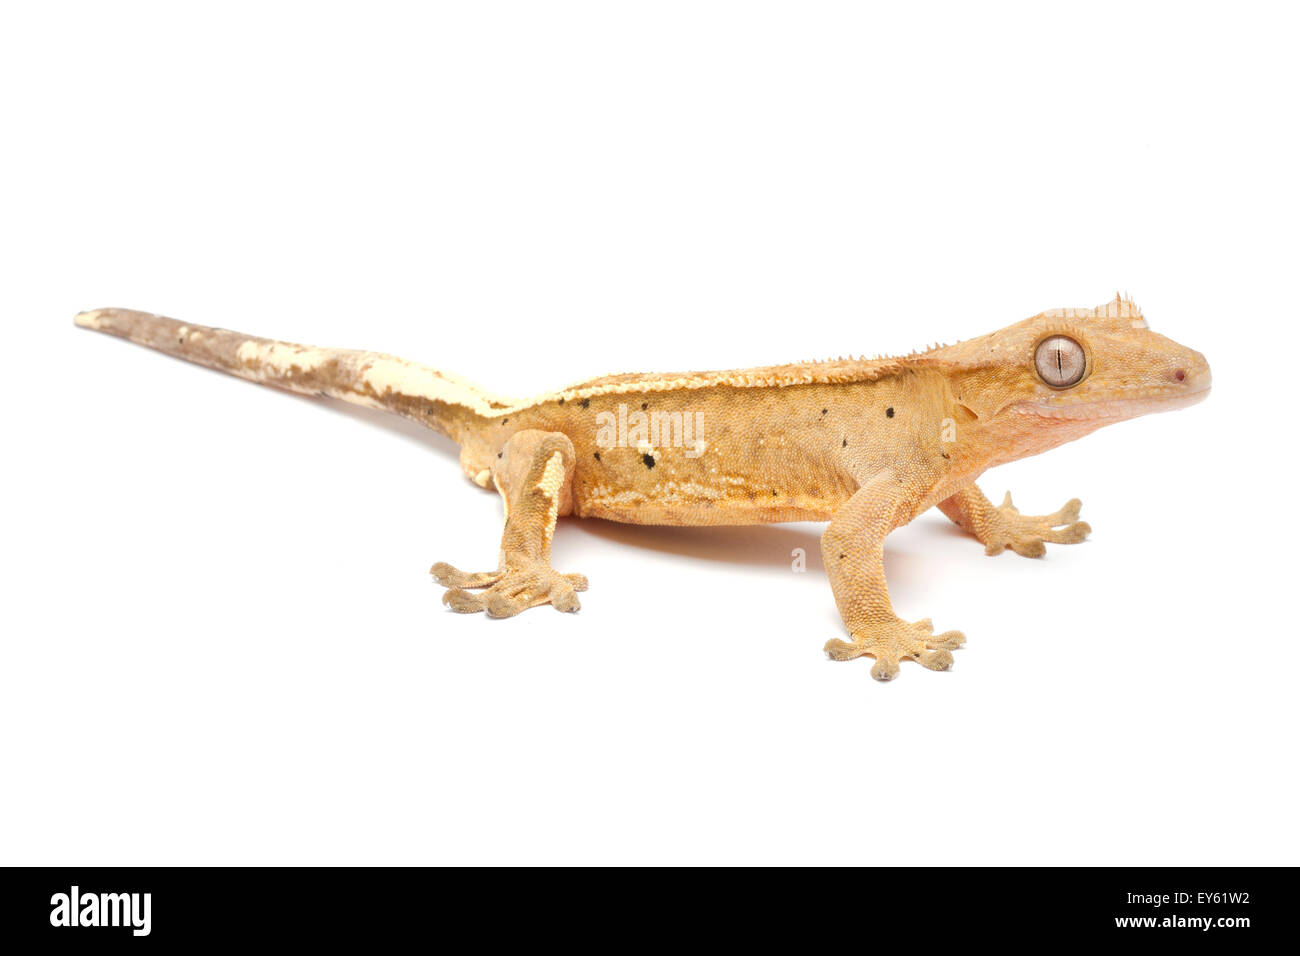 New Caledonia Crested Geck 'pin striped' on white background Stock Photo